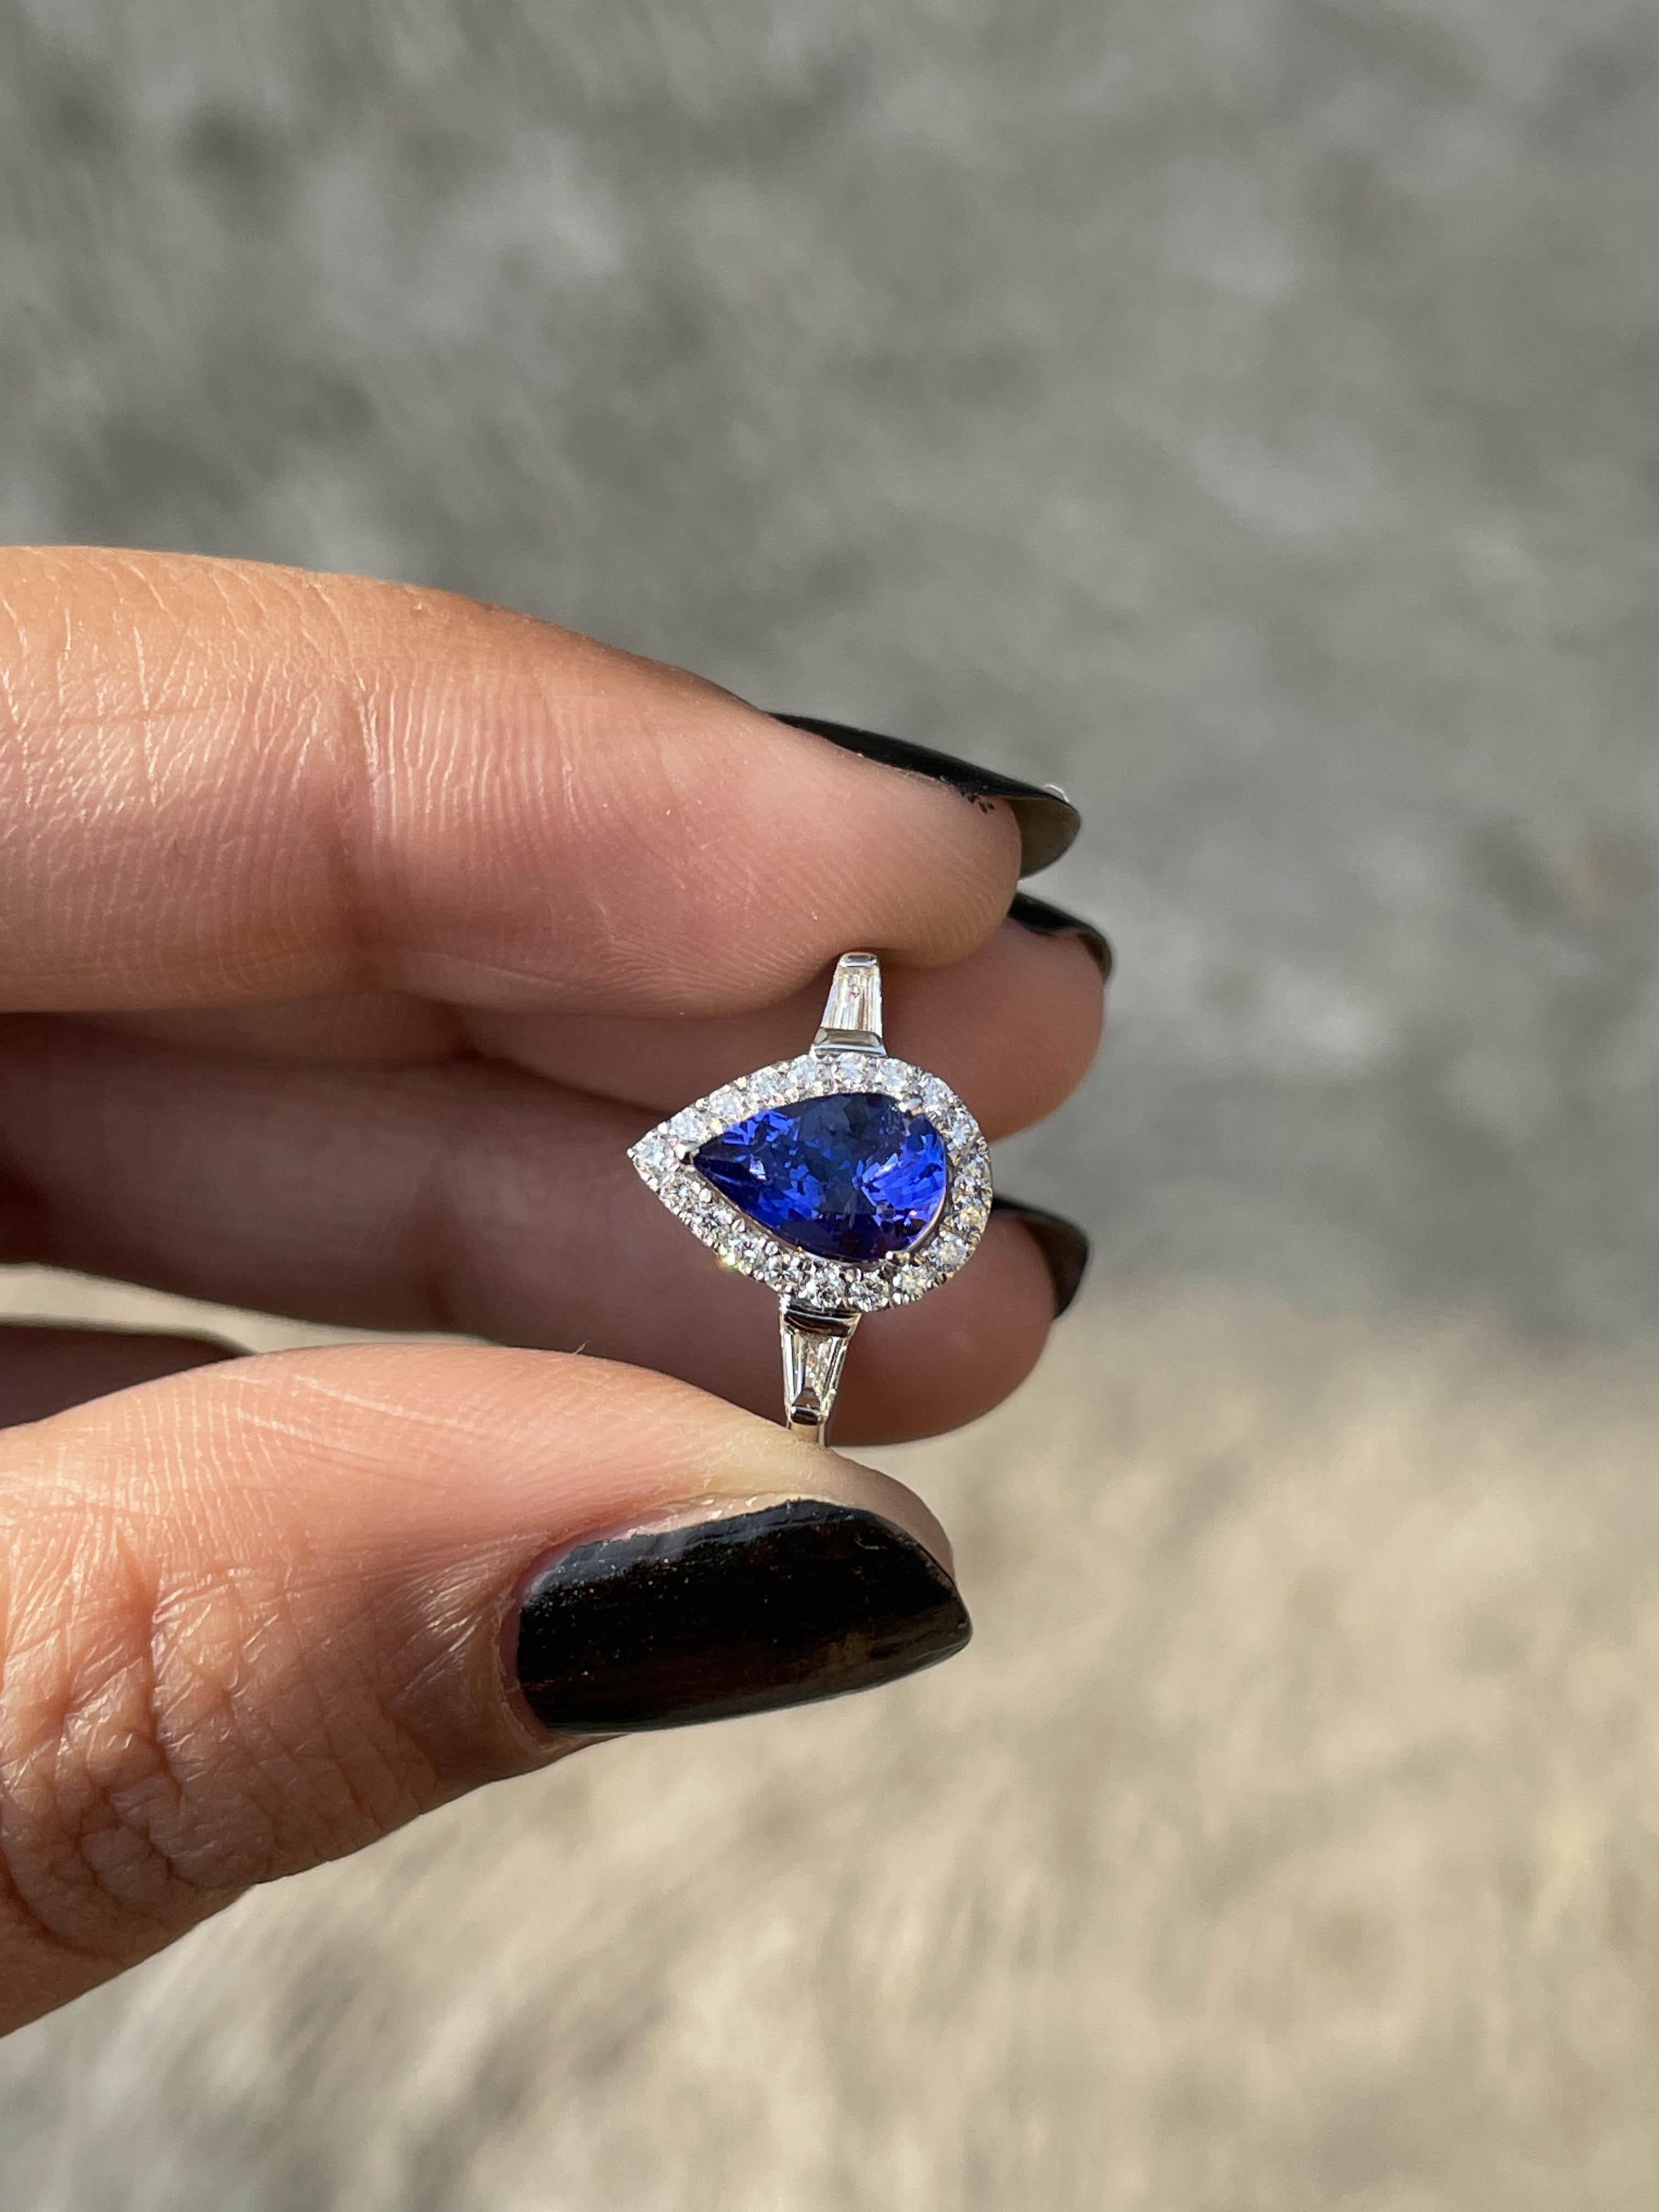 For Sale:  1.1 CTW Pear Shaped Tanzanite and Diamond Ring in 18k Solid White Gold 9